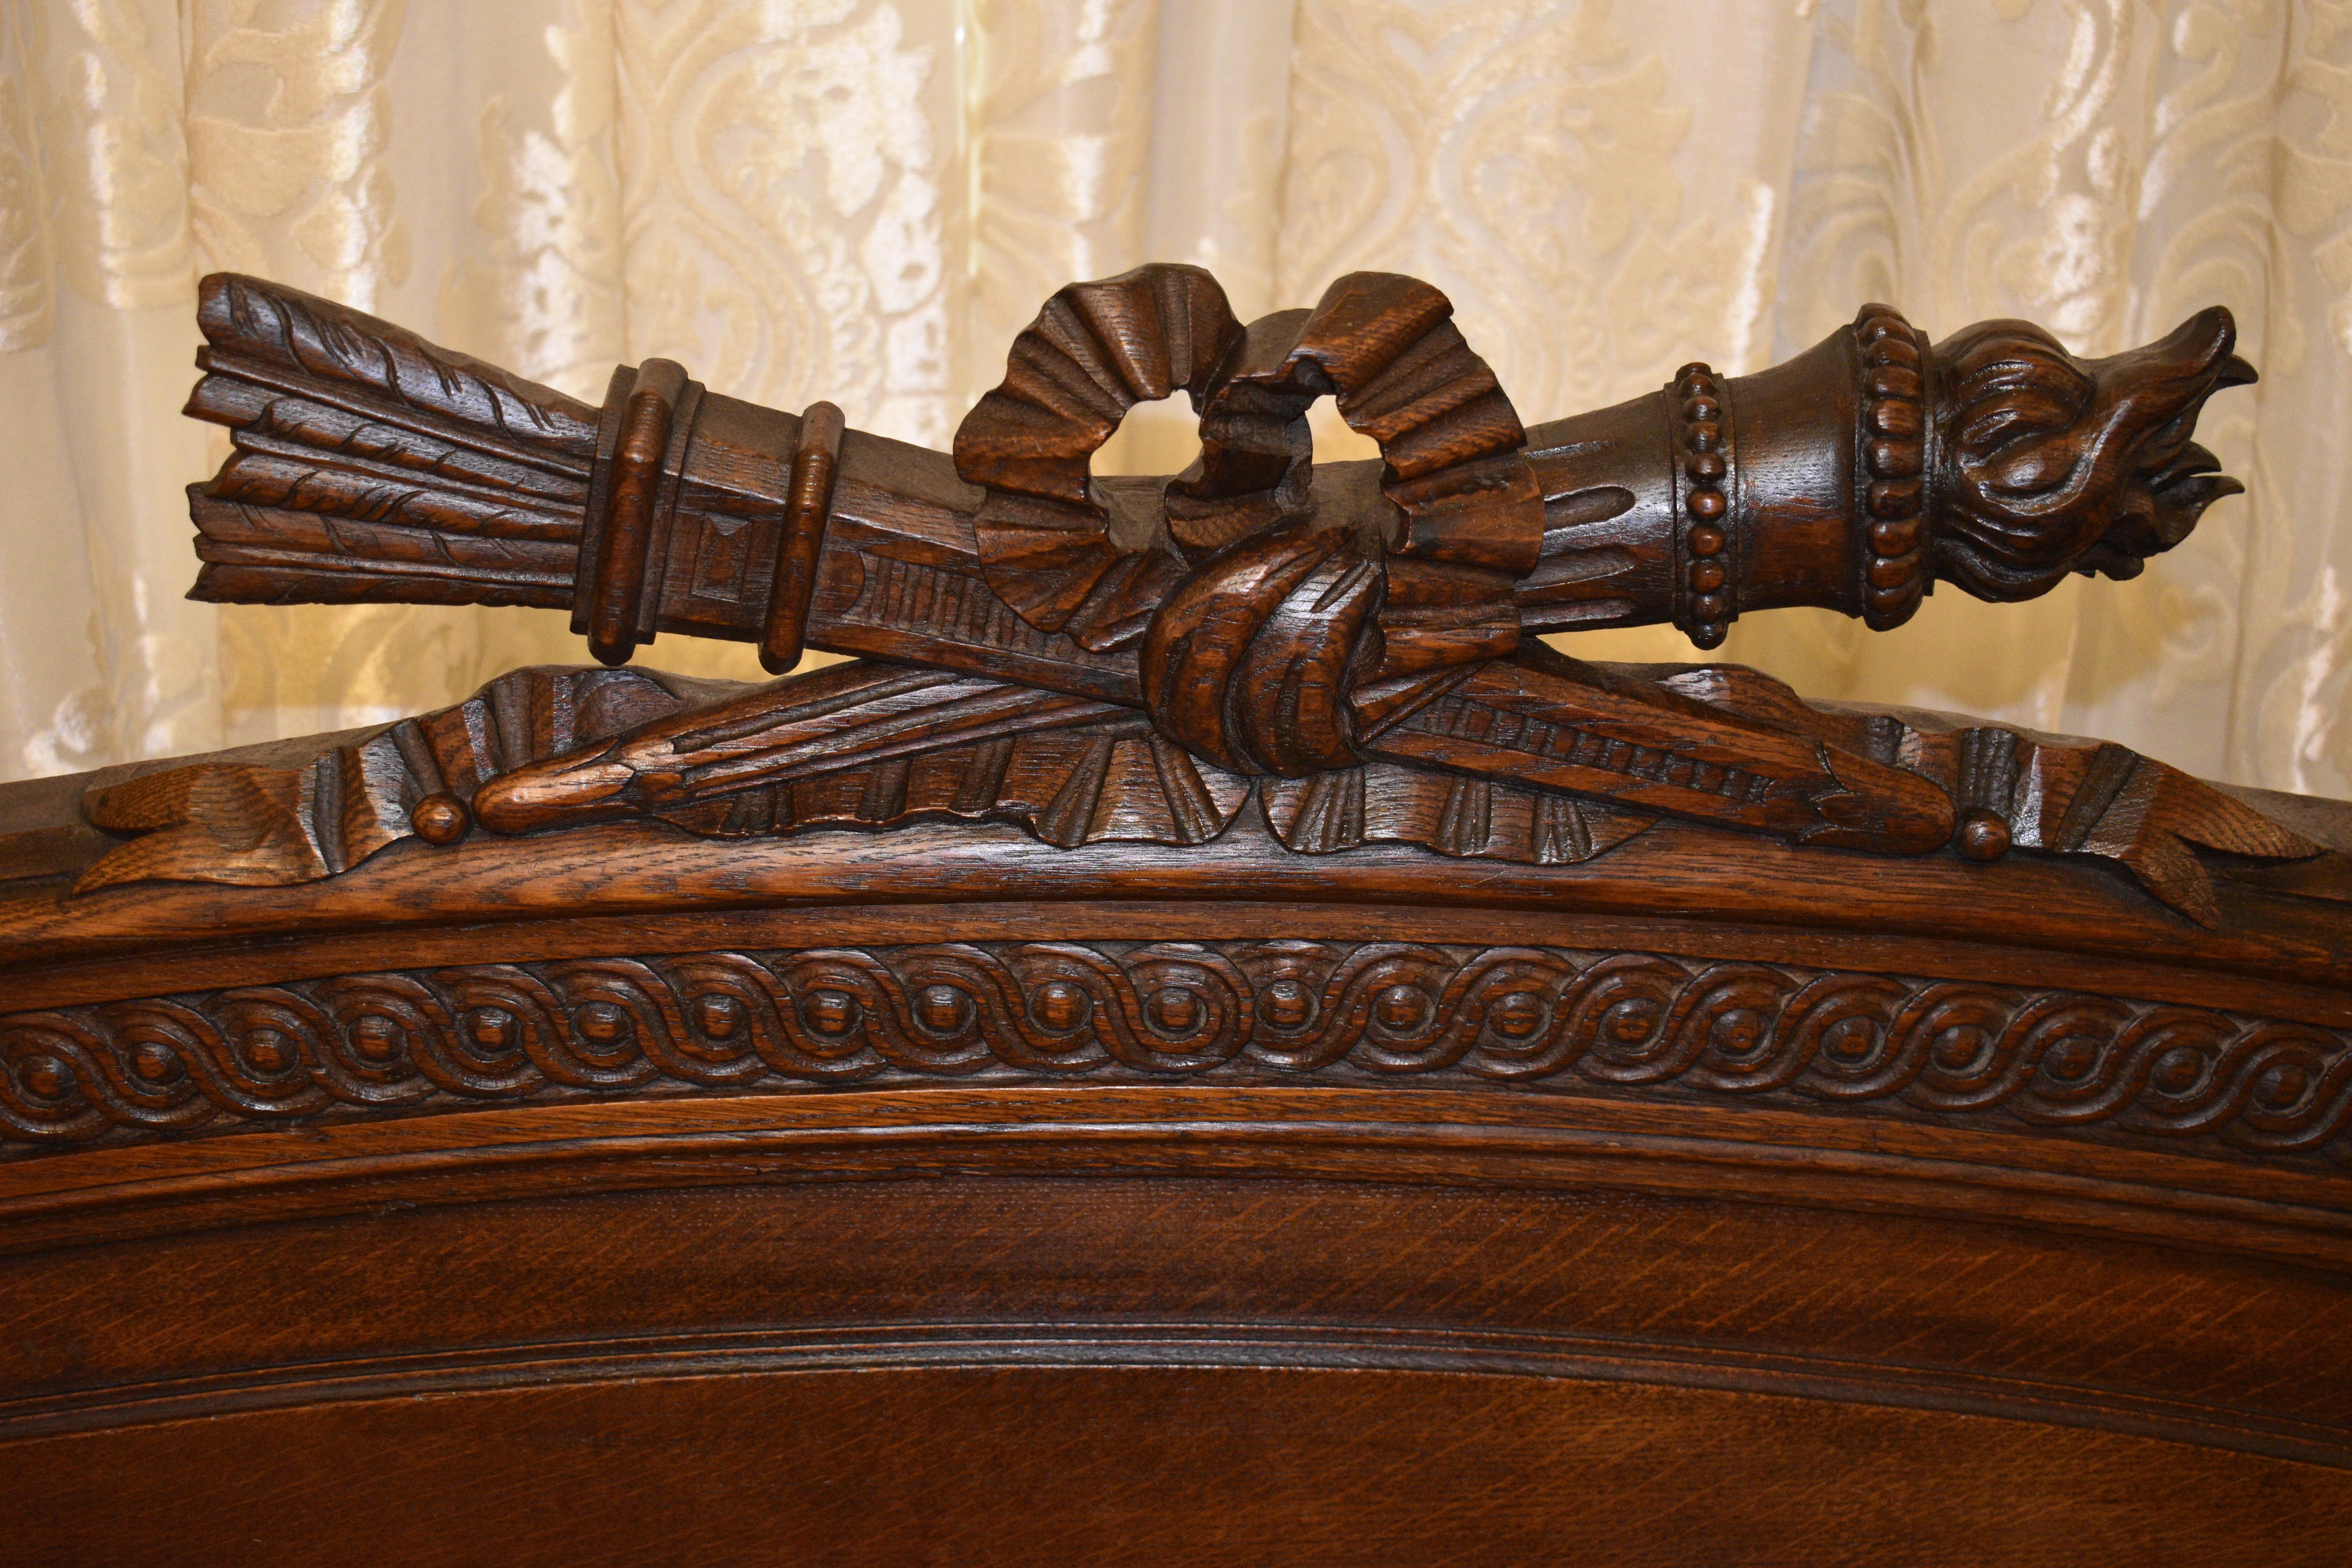 Arrows in quill and a torch tied with carved timber bow to the head board. Four large finials to the corners and a carved design repeated on the foot of the bed. Comes with slats

Circa: 1870

Material: French Oak

Country of Origin: